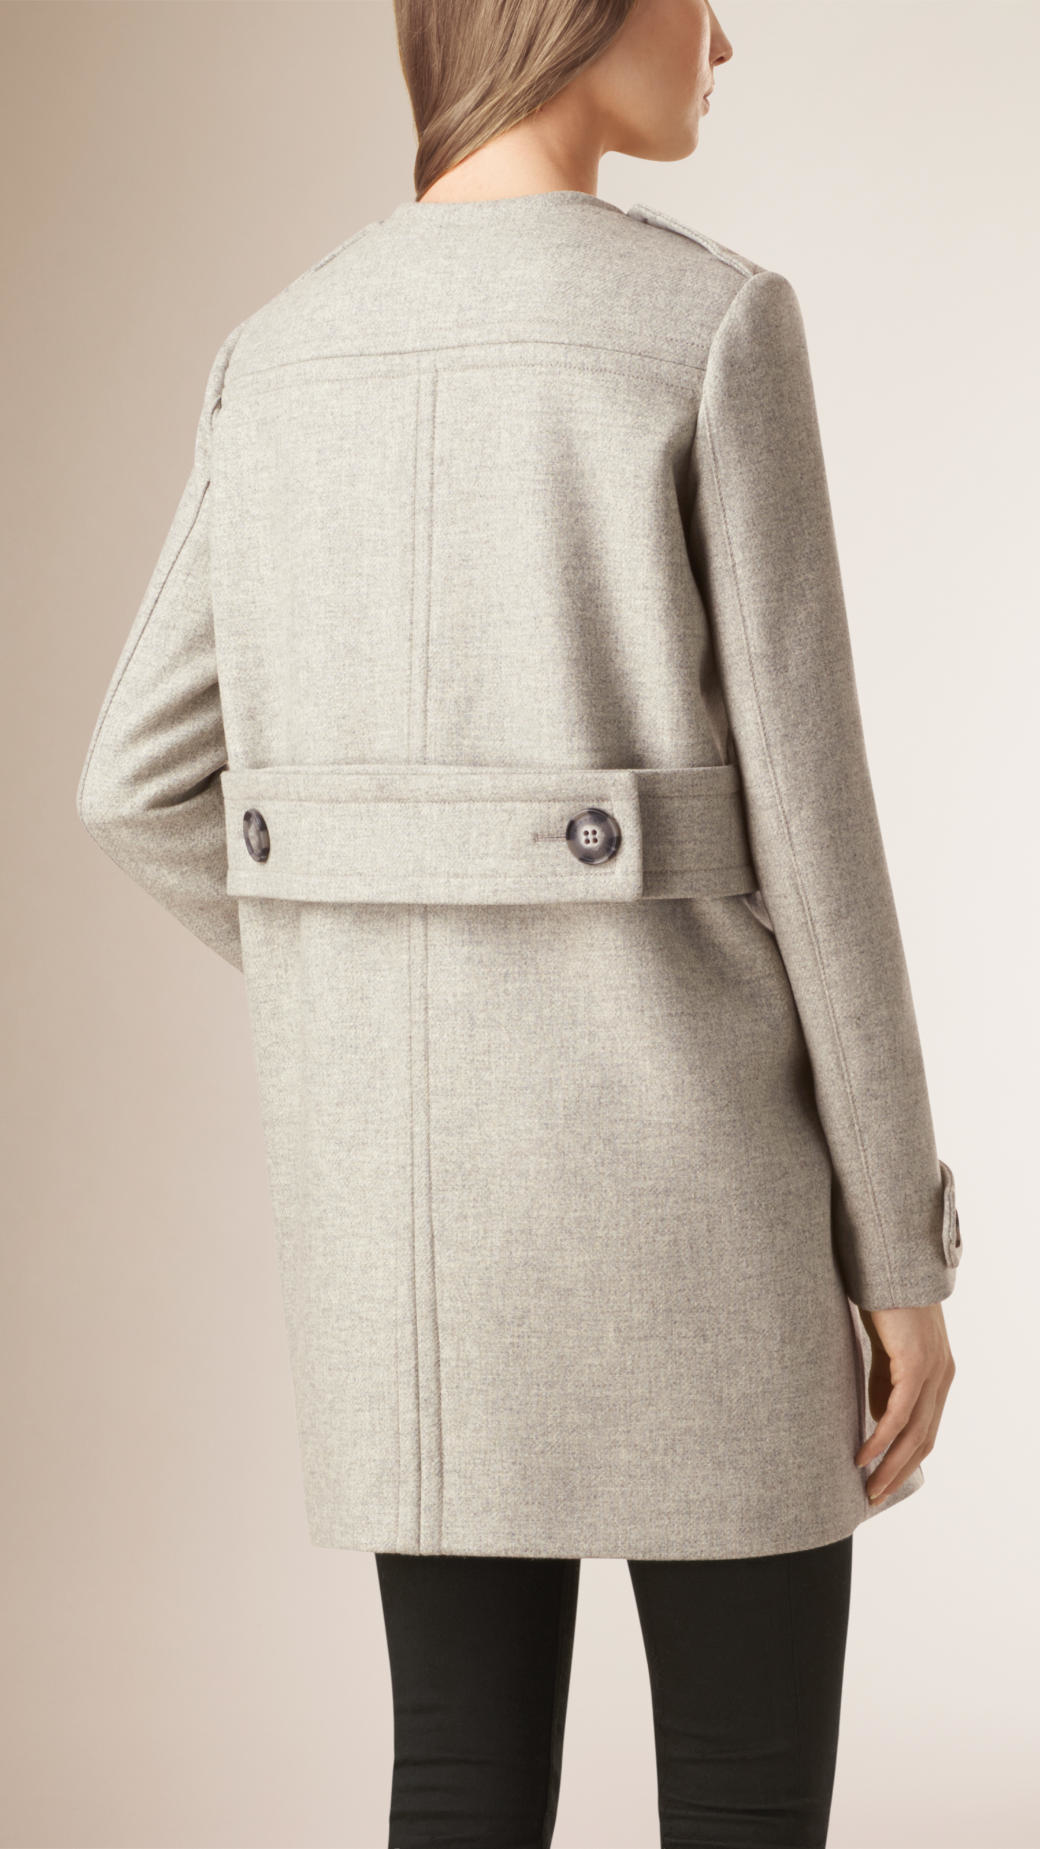 Lyst - Burberry Collarless Wool Blend Coat in Gray